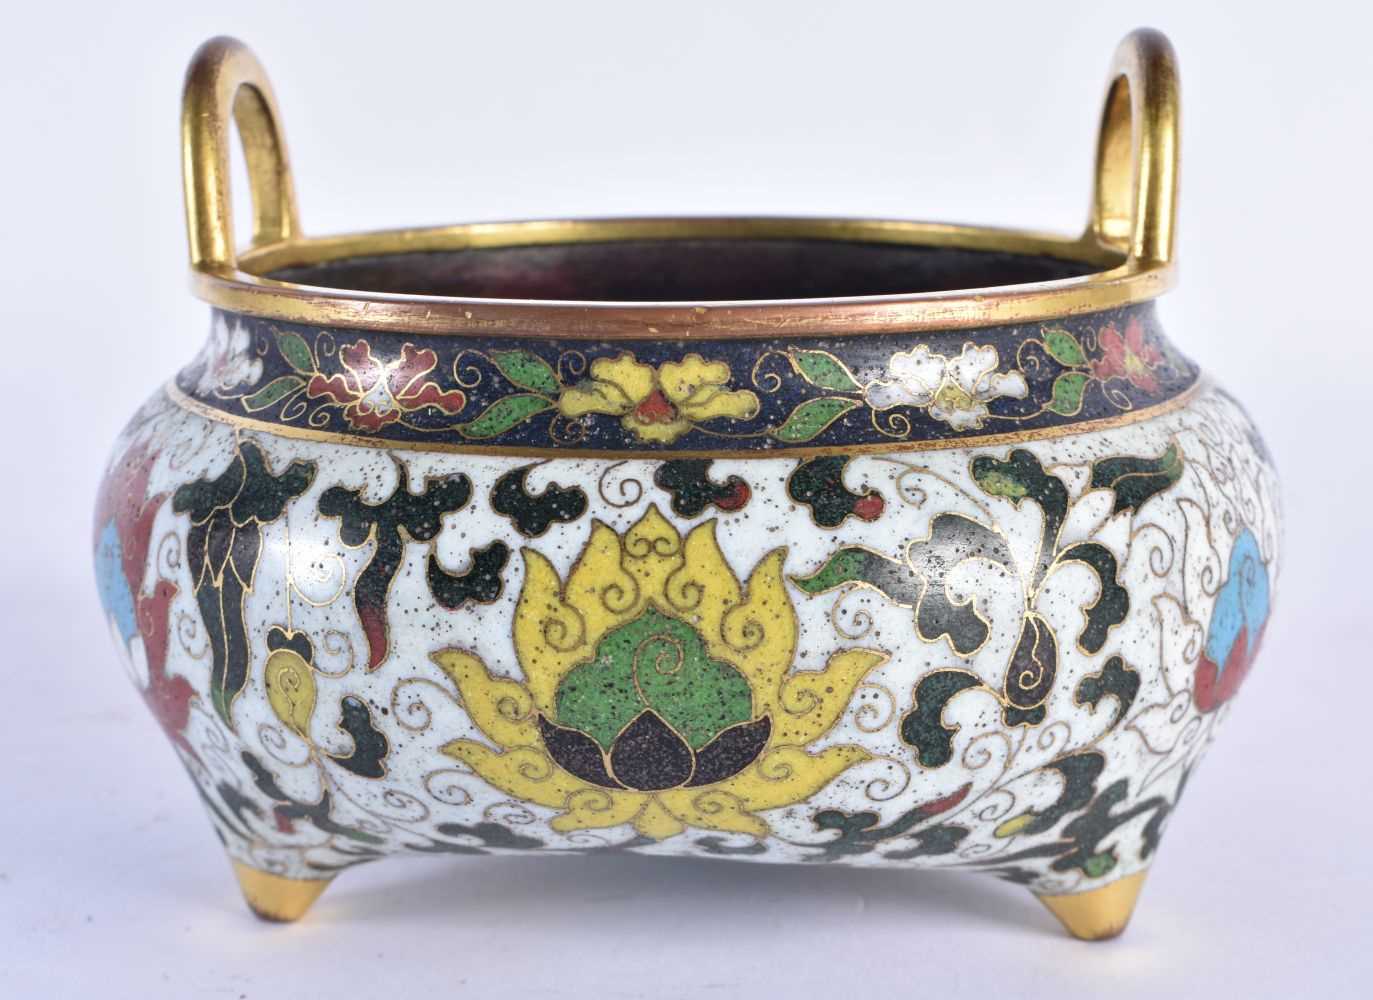 A FINE CHINESE TWIN HANDLED CLOISONNE ENAMEL CENSER probably 16th/17th century, decorated with - Image 3 of 5